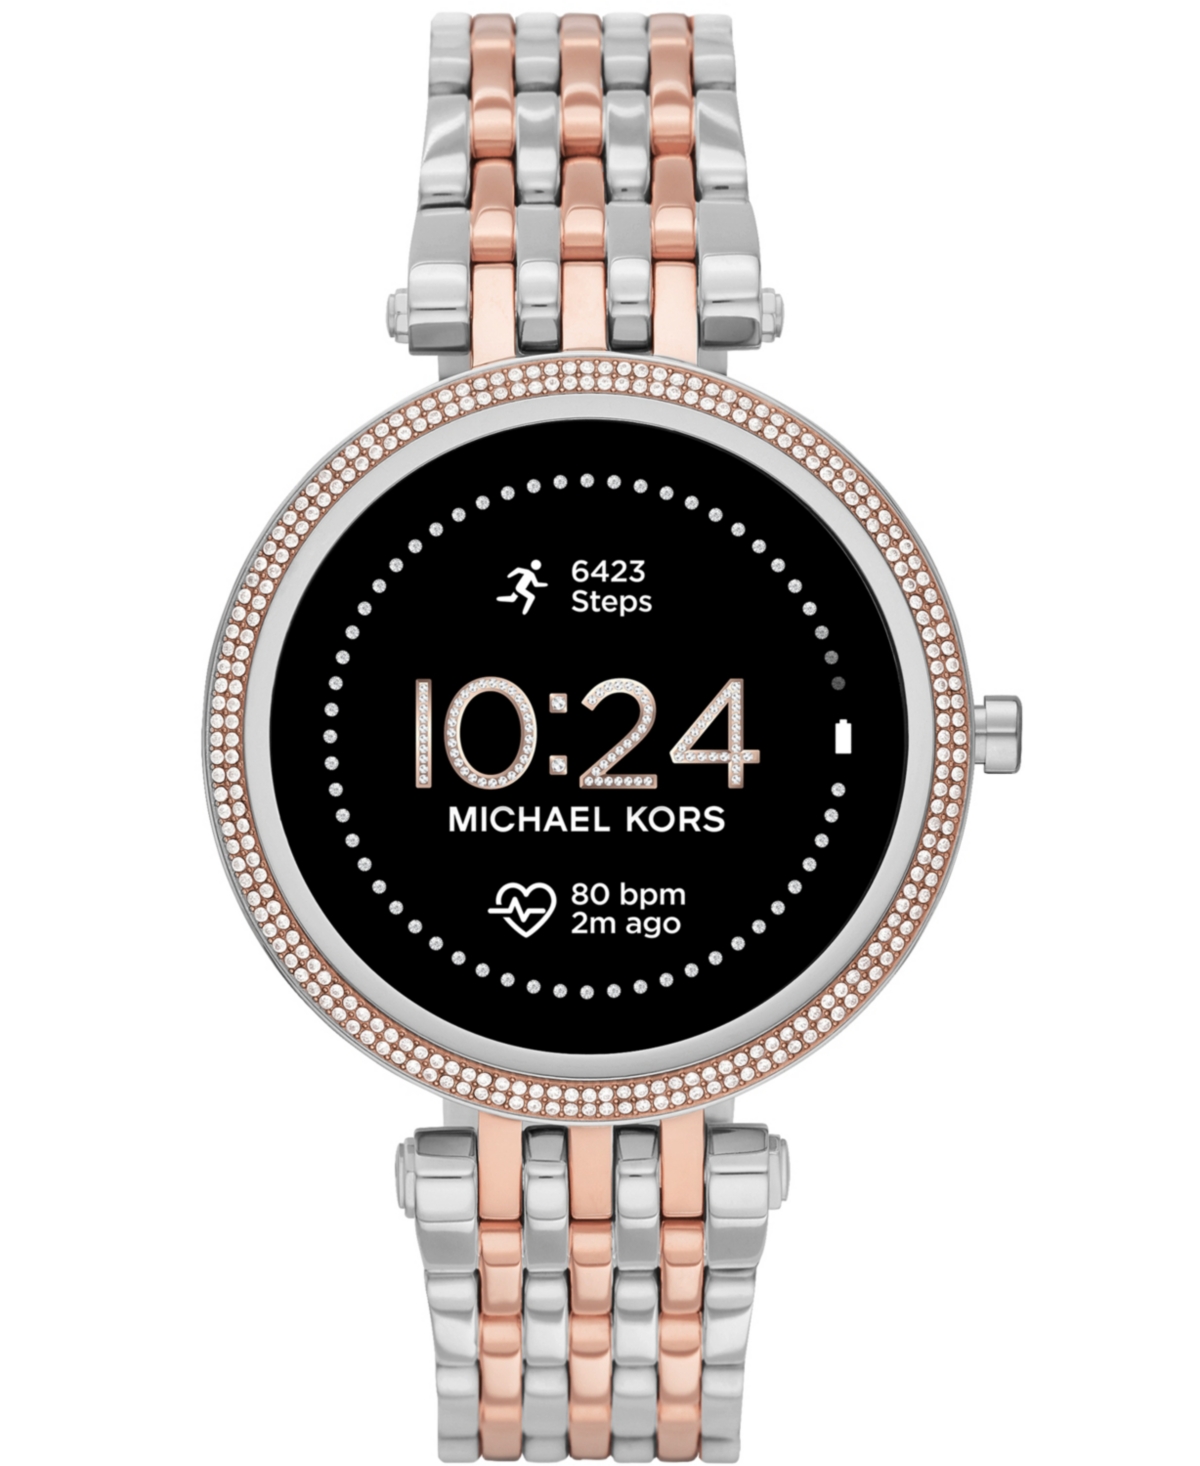 Michael Kors Access Gen 5e Darci Two-Tone Stainless Steel Smartwatch 43mm &  Reviews - All Watches - Jewelry & Watches - Macy's